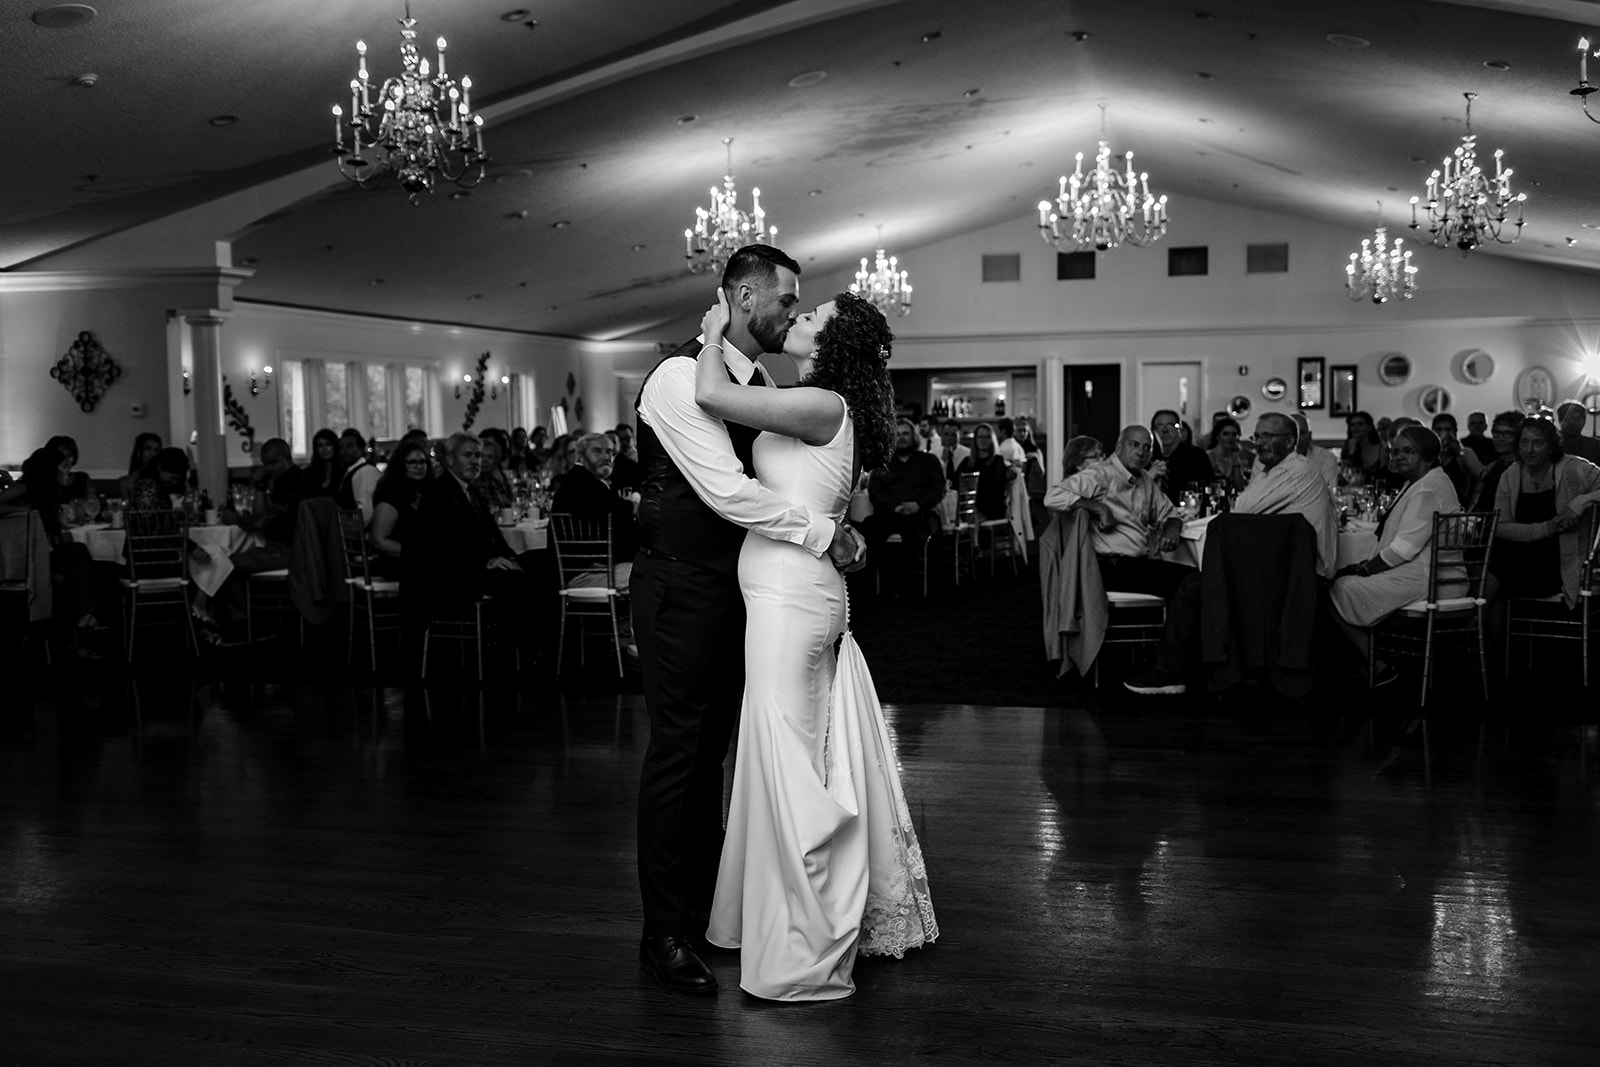 Bride and groom happily share a first dance at Traditions in Syracuse, NY.